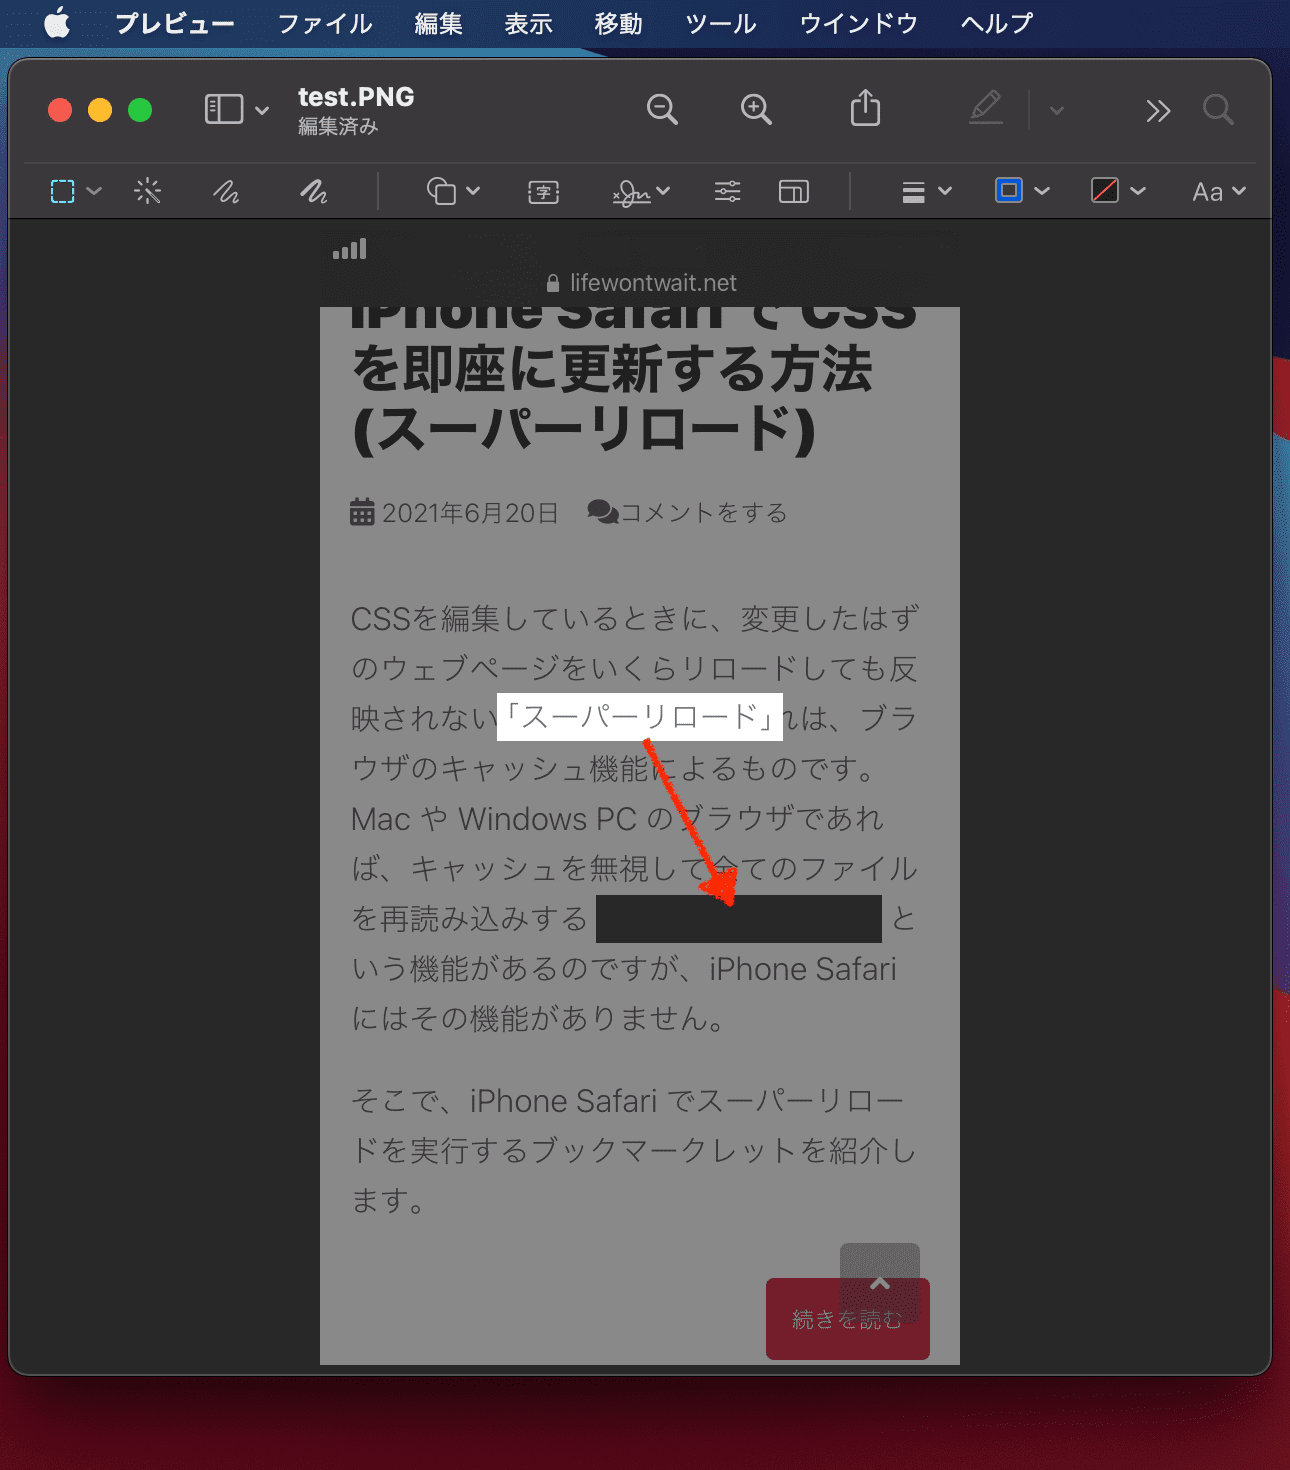 highlight-part-of-an-image-in-the-mac-preview-app_07